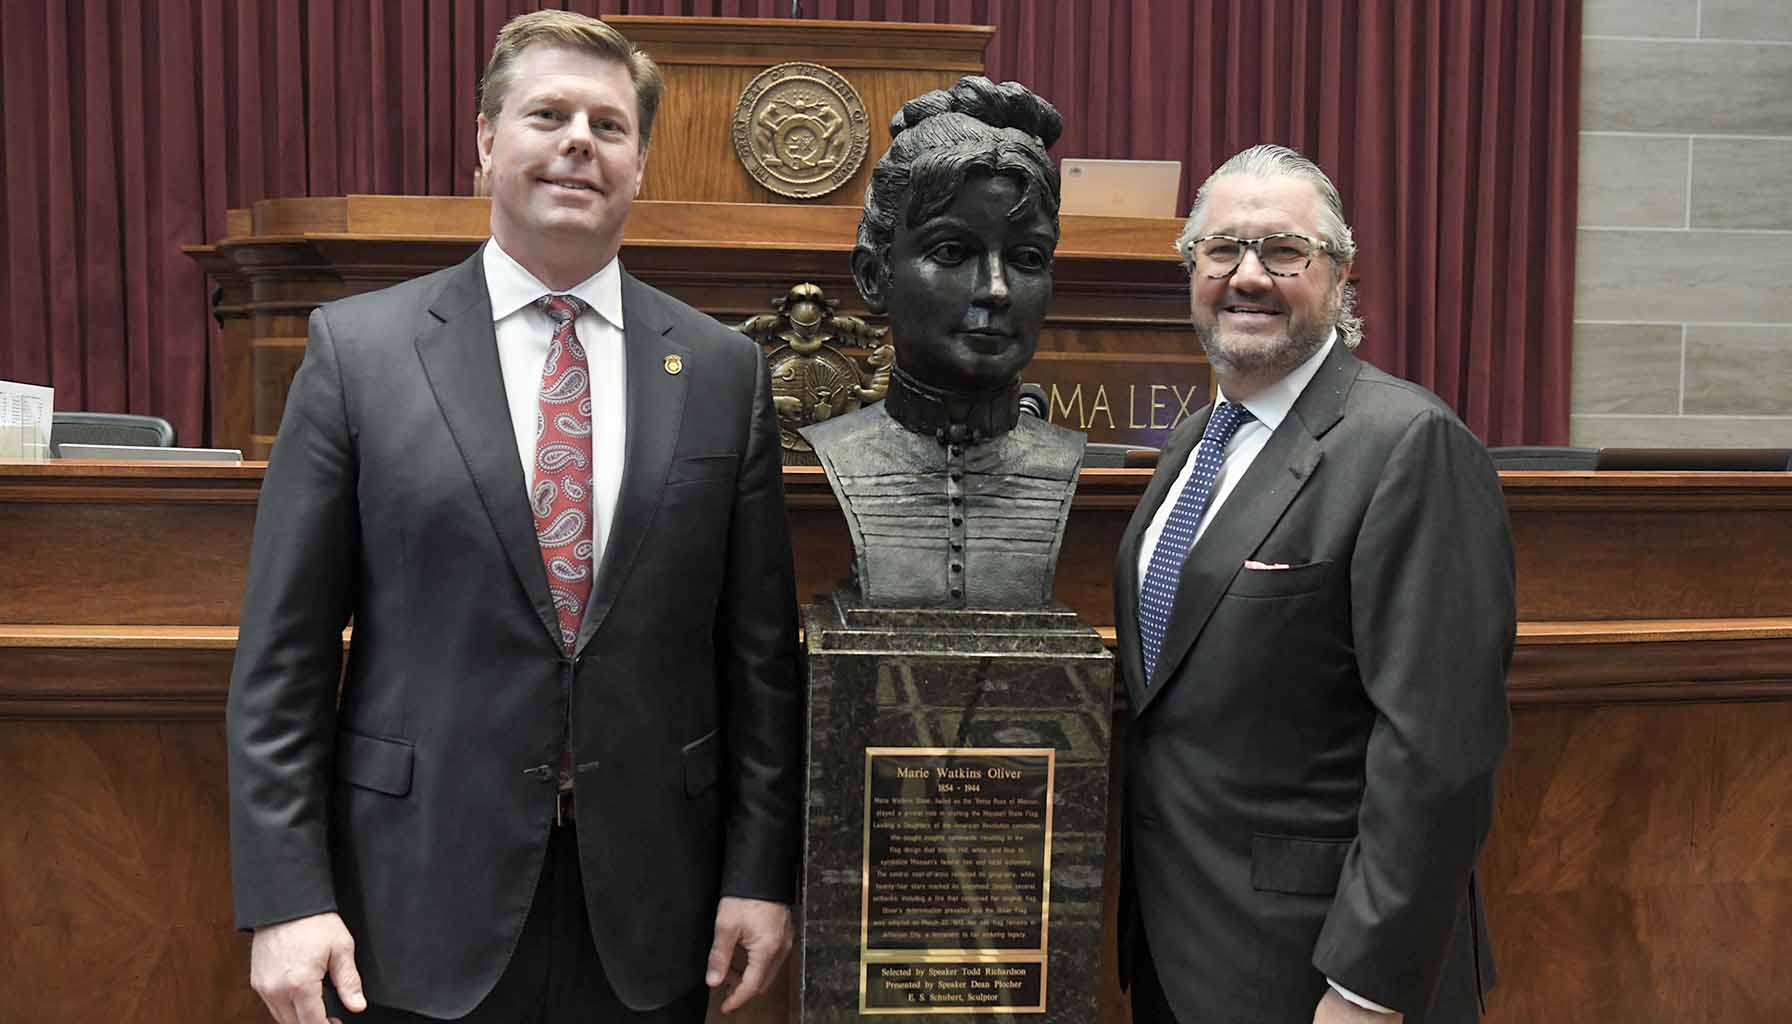 Missouri House Speaker Dean Plocher stands alongside the newly unveiled bust of Marie Watkins Oliver with her great-great grandson Jack Oliver